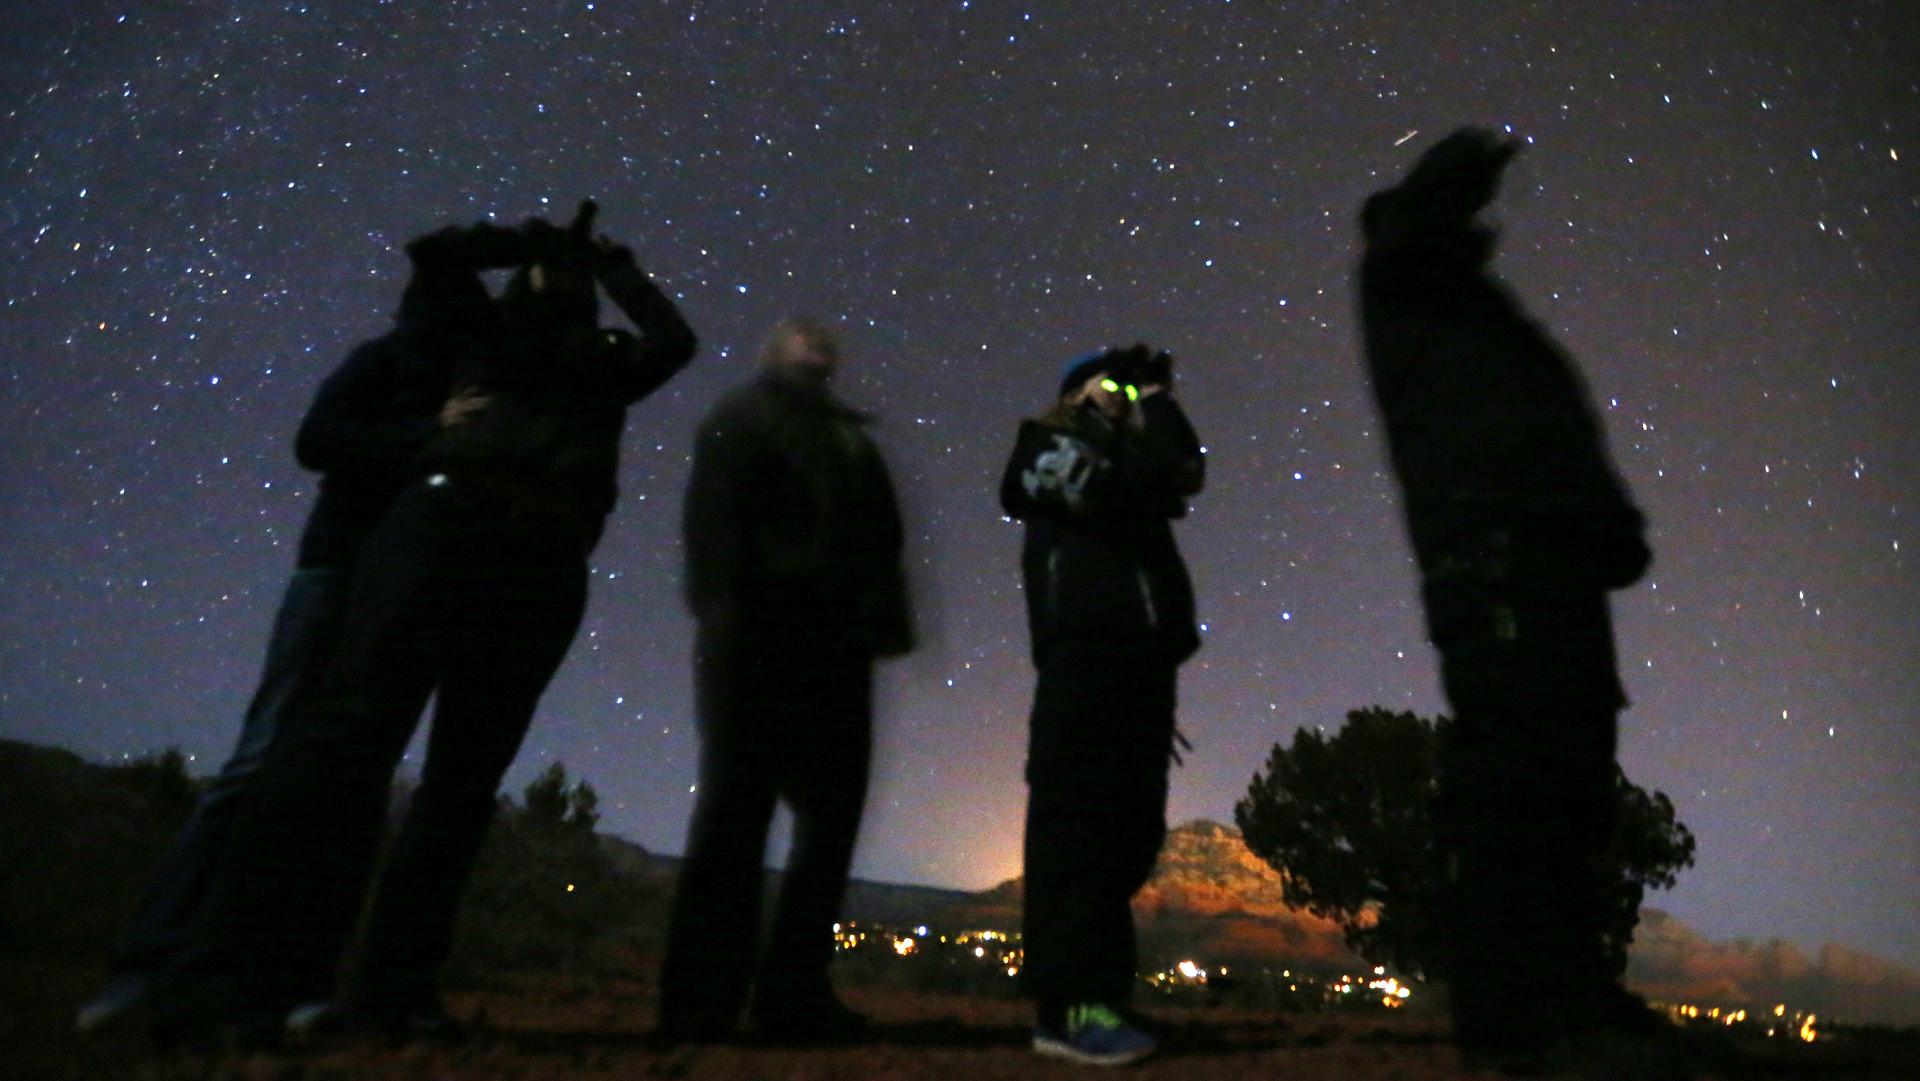 People use night vision goggles to look at the night sky during an Unidentified Flying Object (UFO) tour in the desert outside Sedona, Arizona, Feb. 14, 2013.